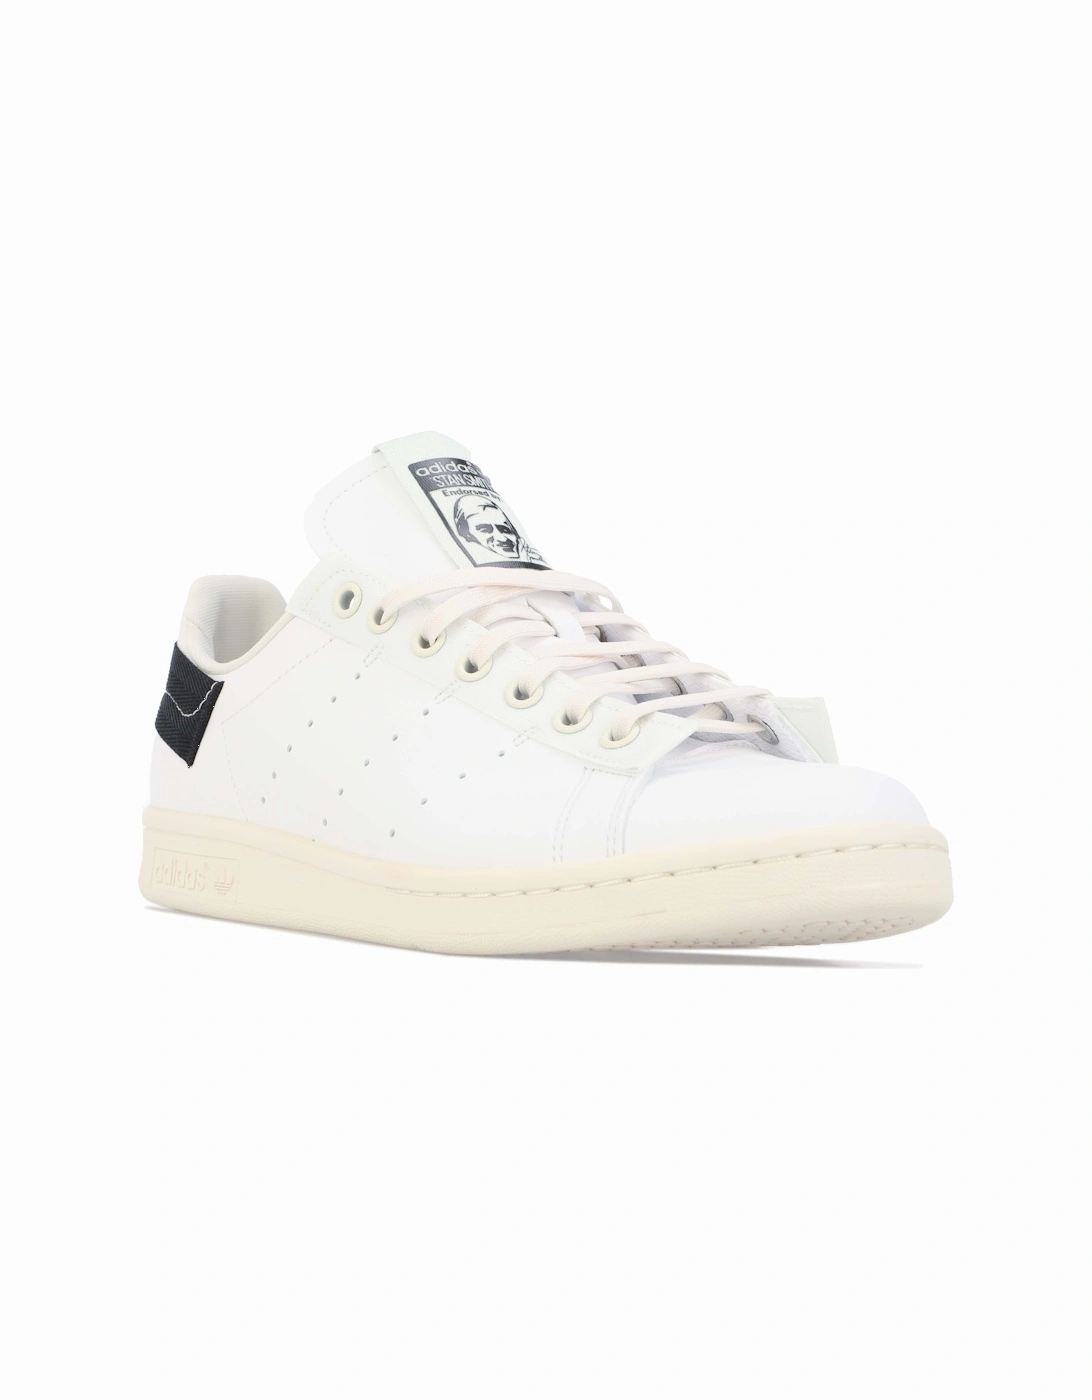 Men's Mens Stan Smith Parley Trainers - White - Size: 6